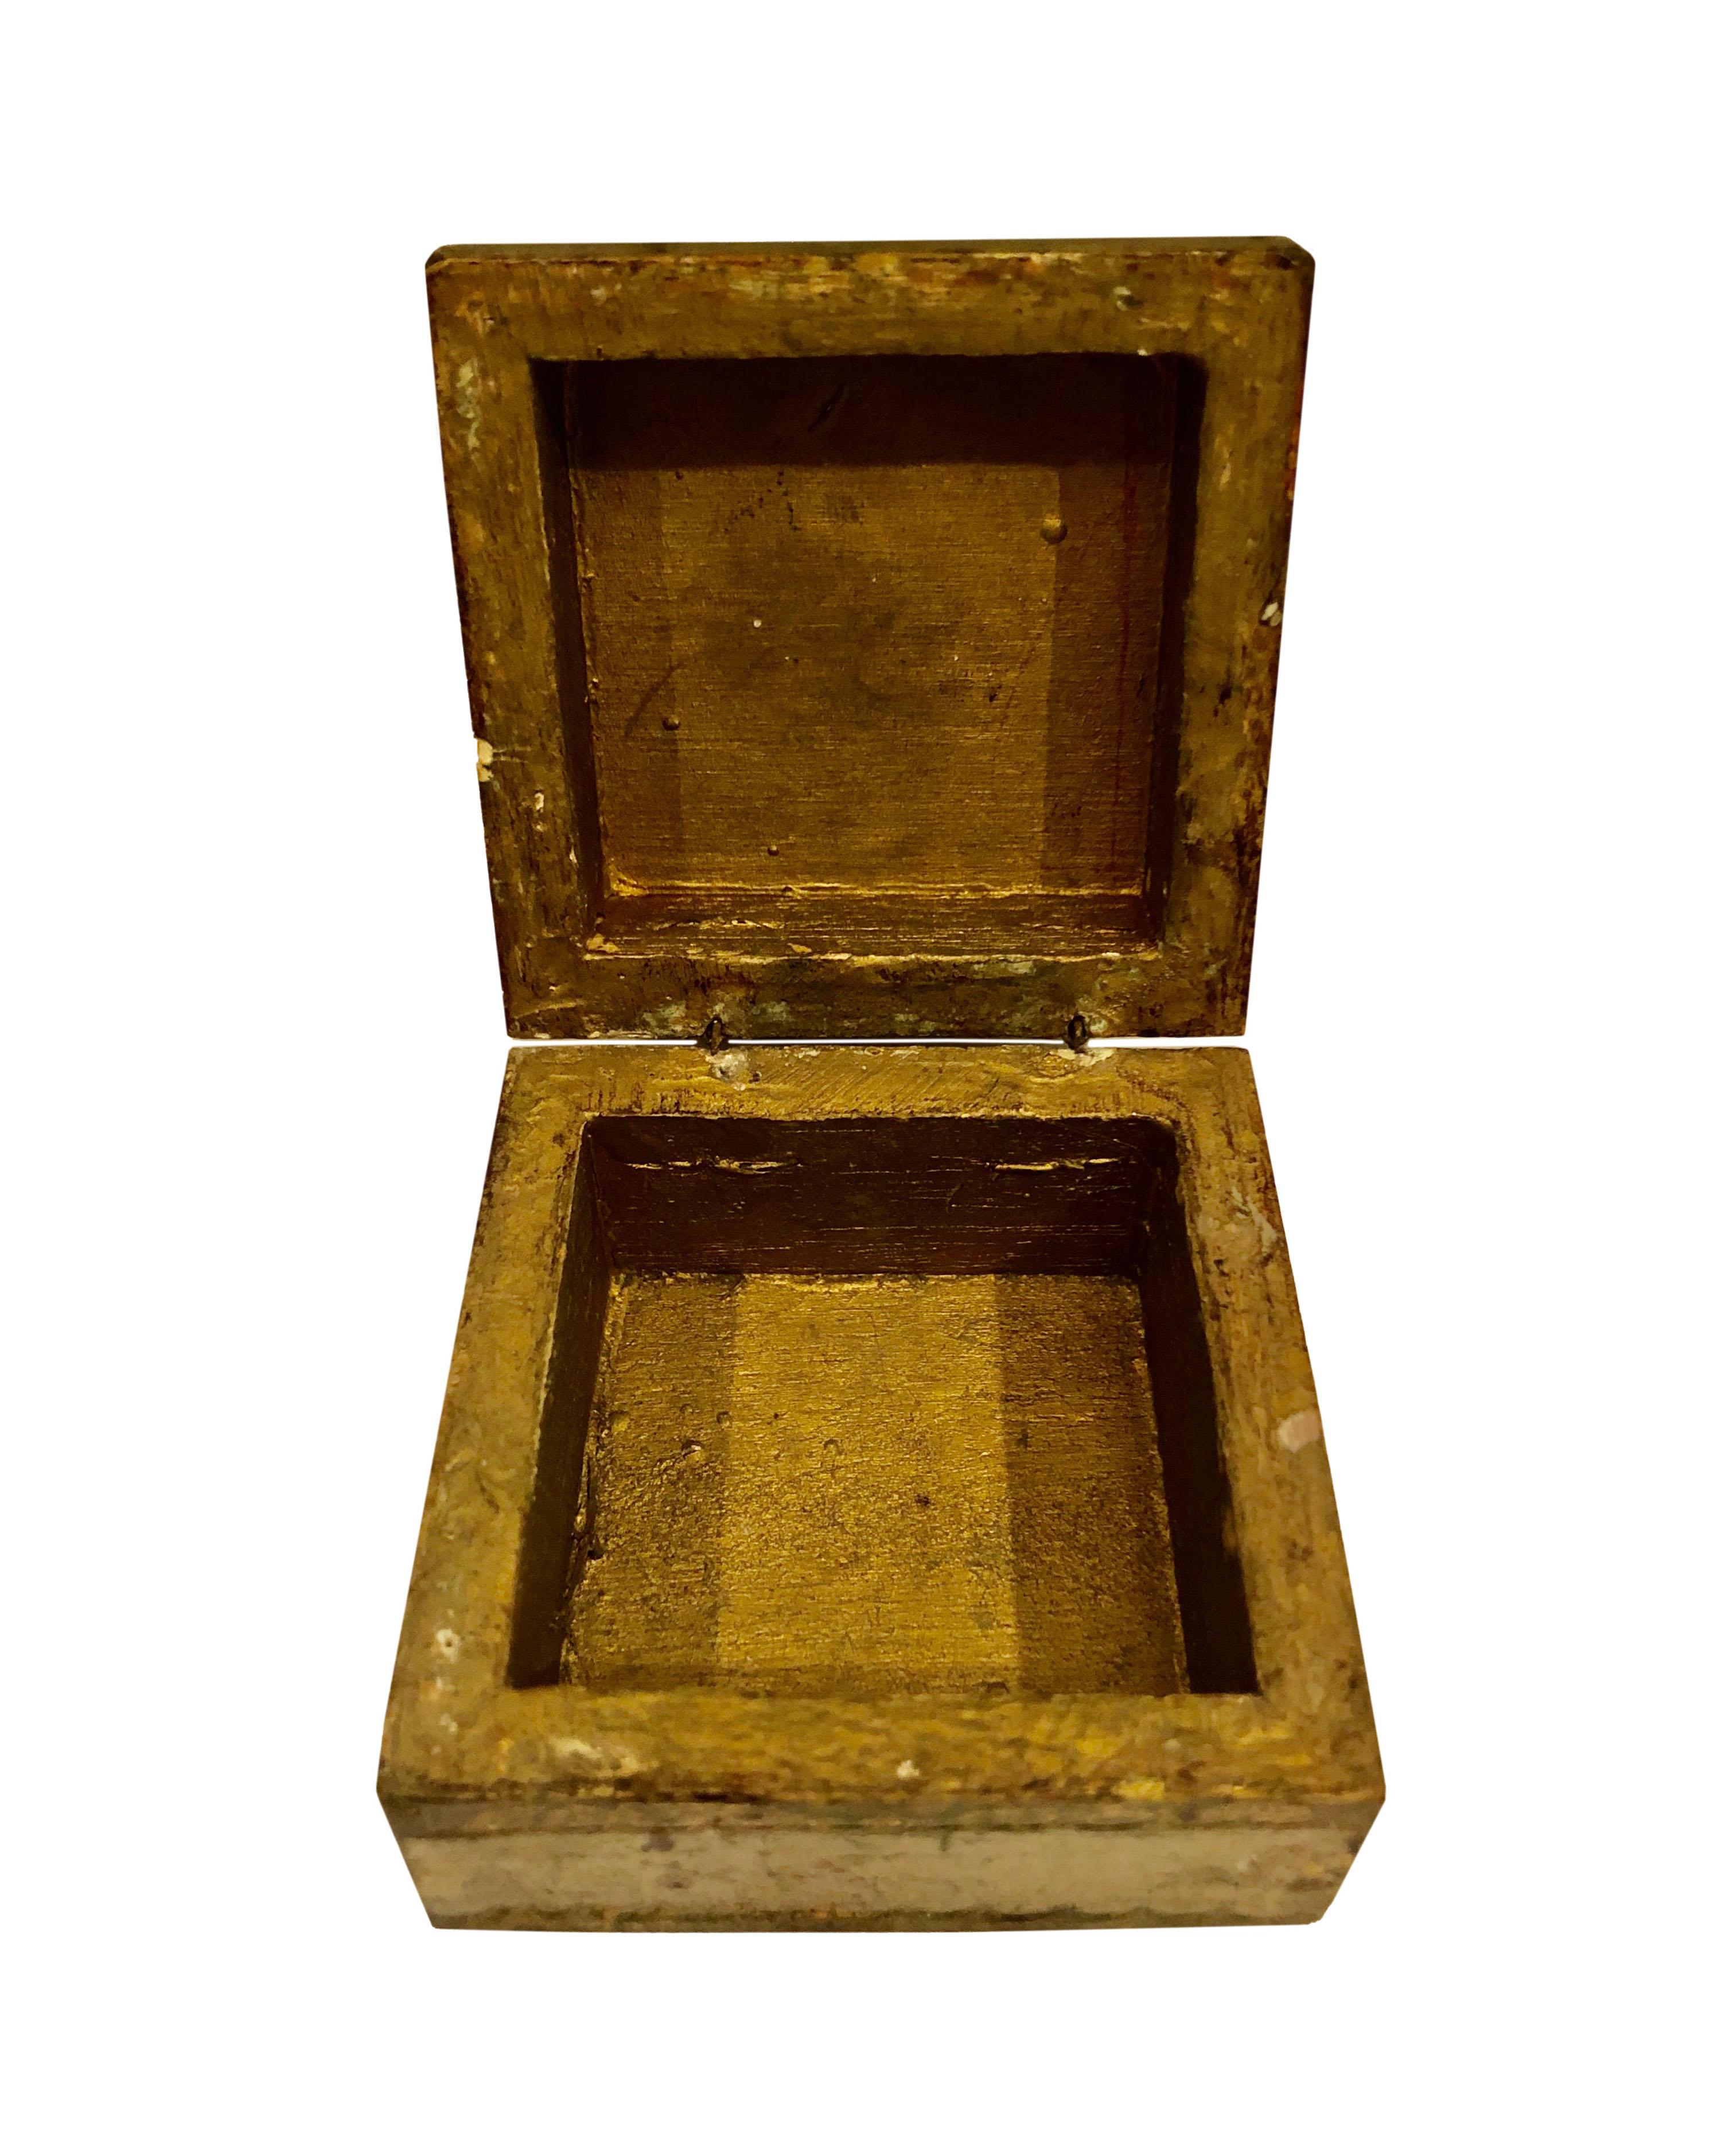 Italian Antique Small Turn of the Century Florentine Box For Sale